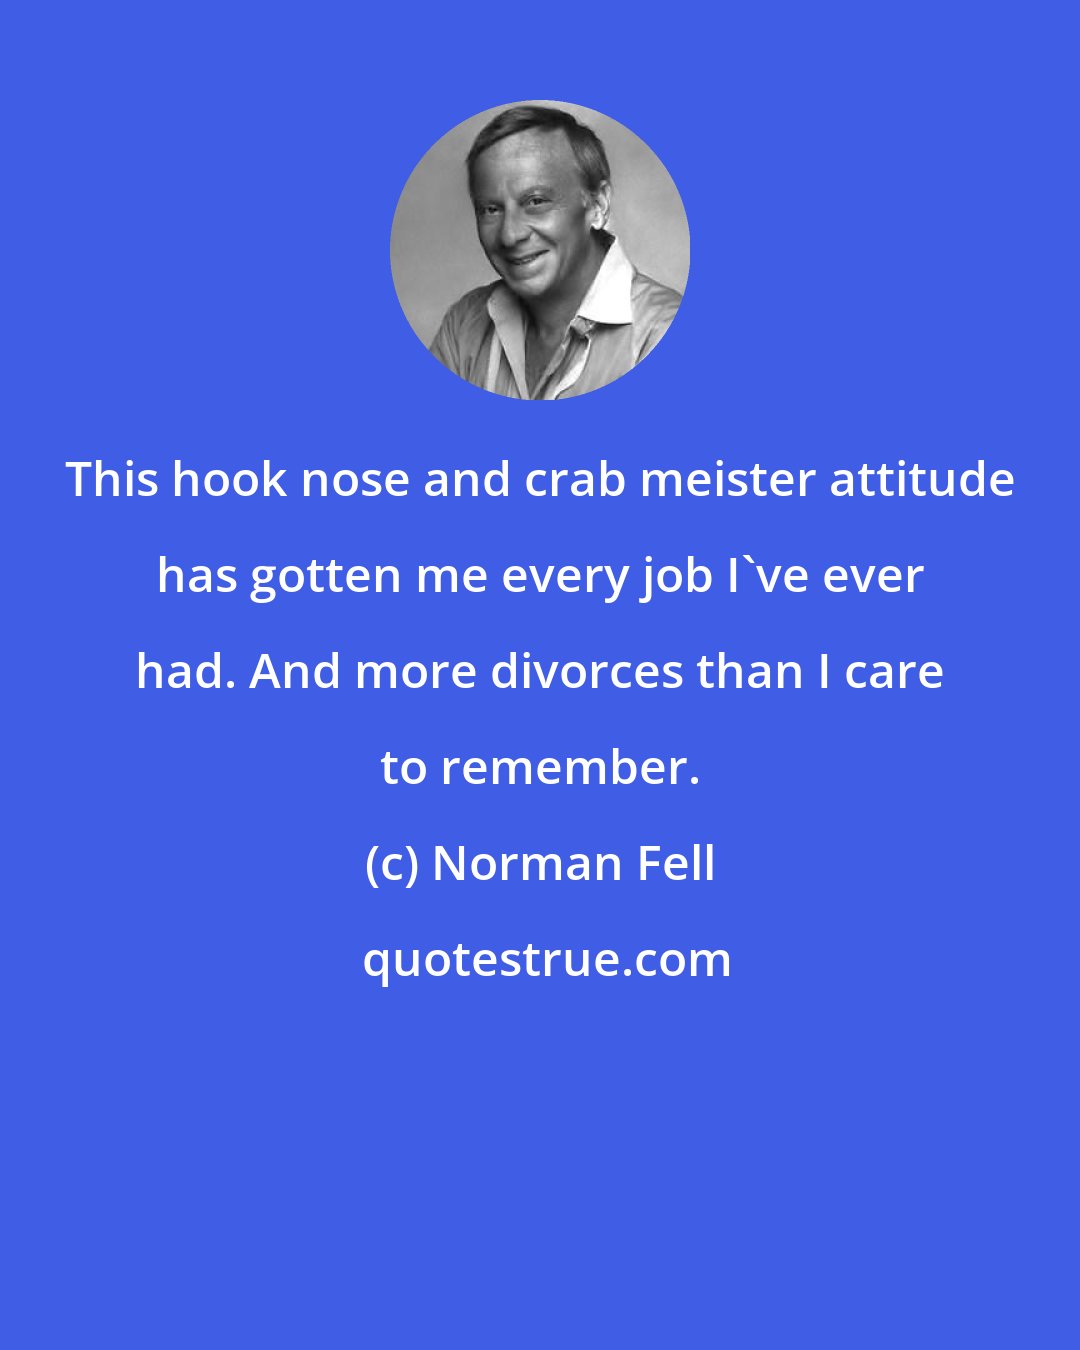 Norman Fell: This hook nose and crab meister attitude has gotten me every job I've ever had. And more divorces than I care to remember.